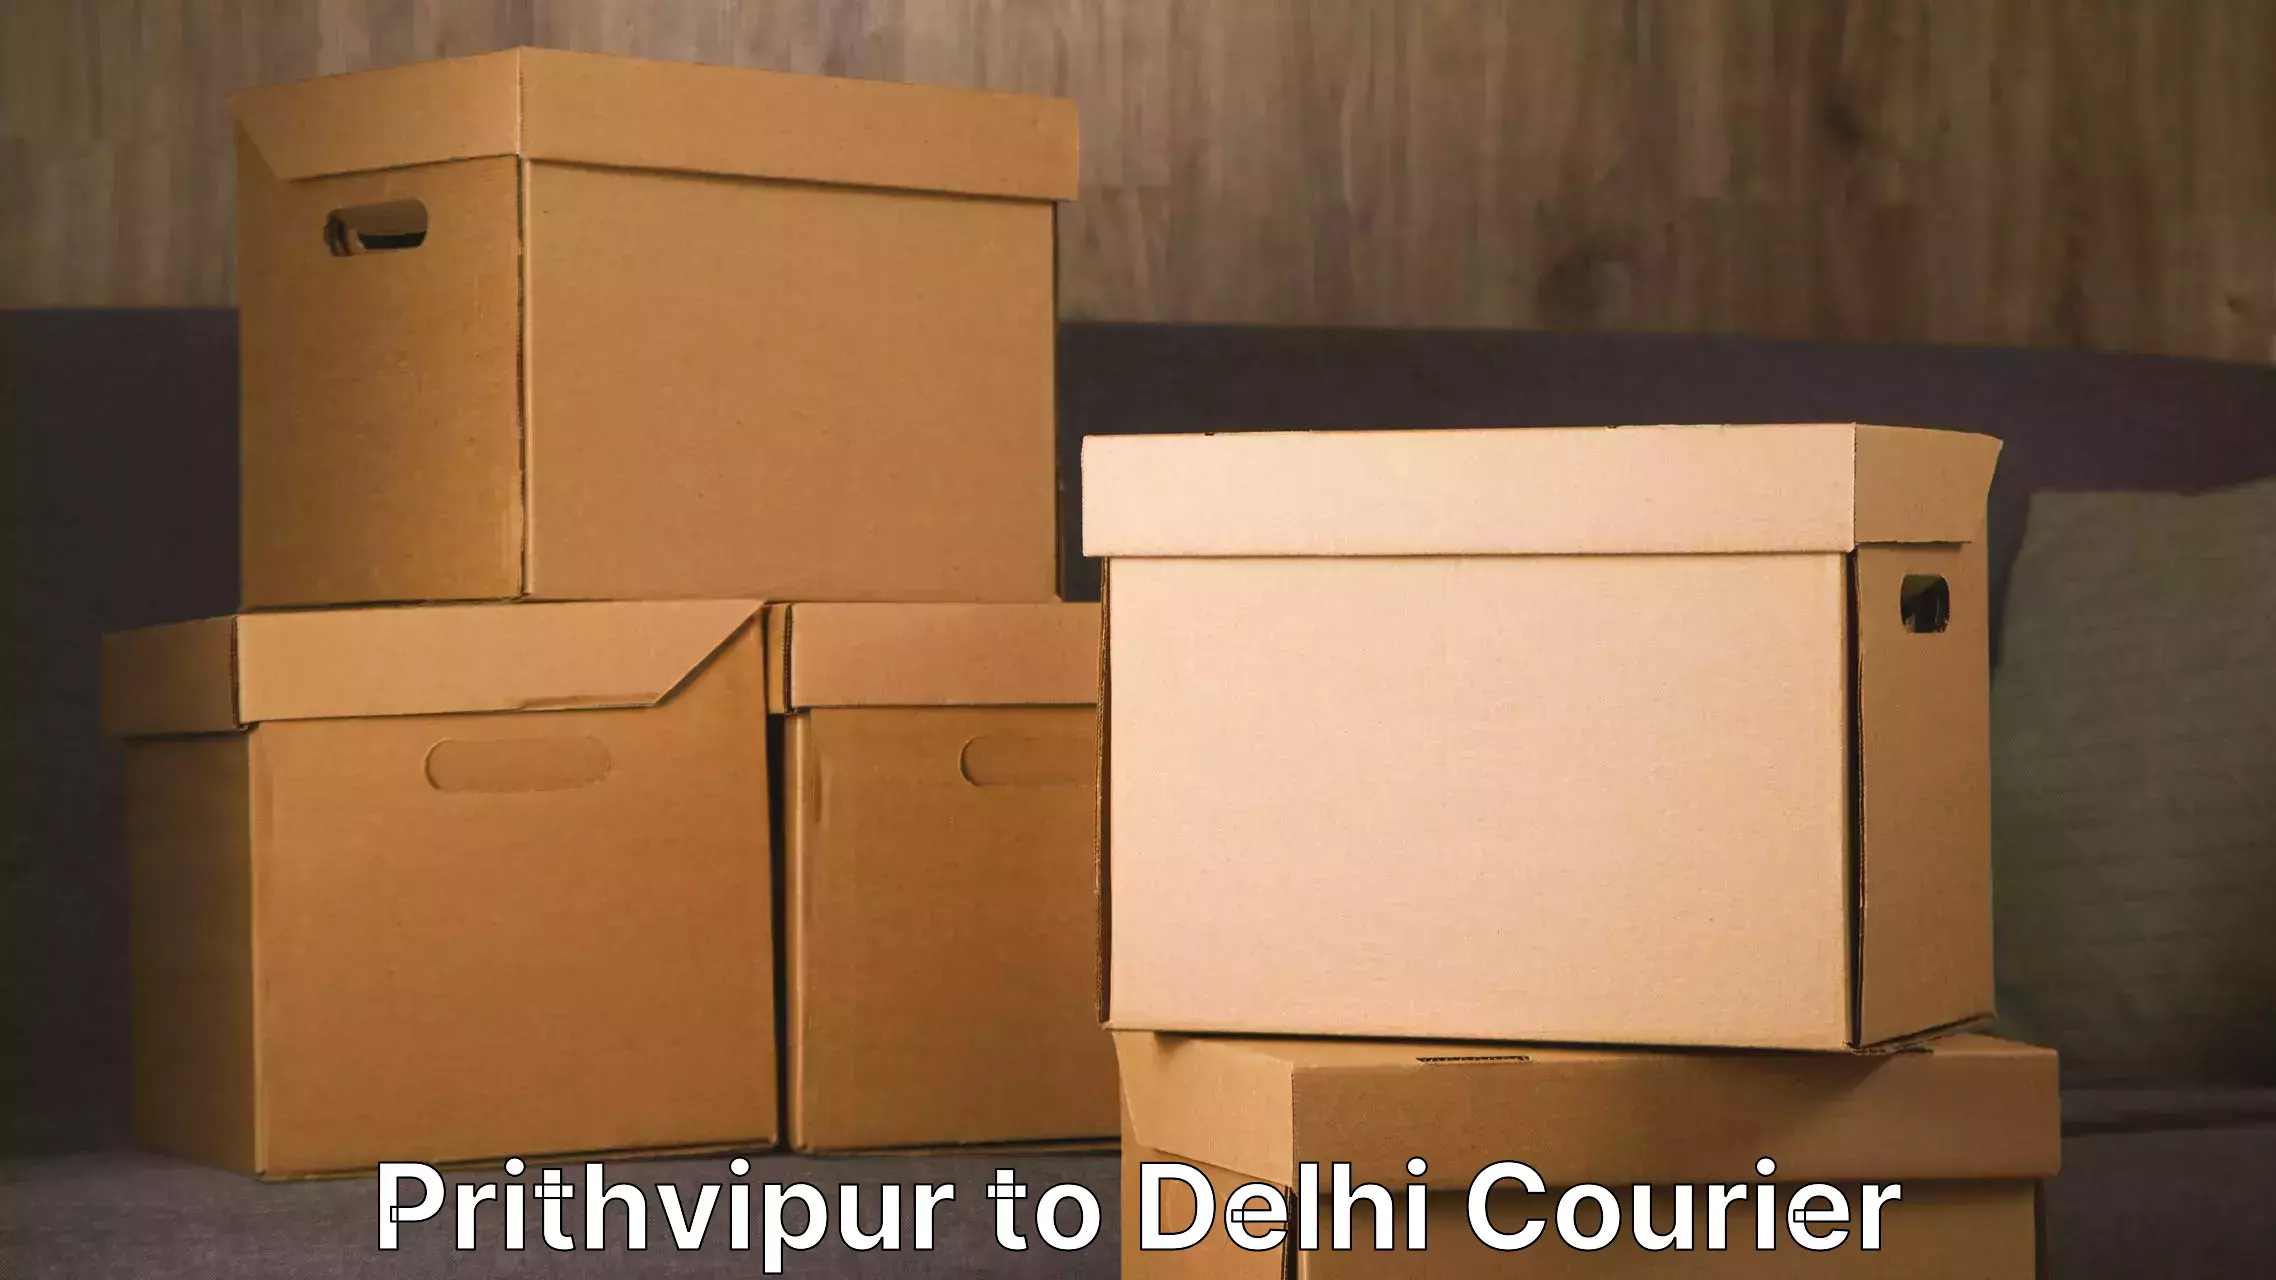 Professional moving company Prithvipur to East Delhi